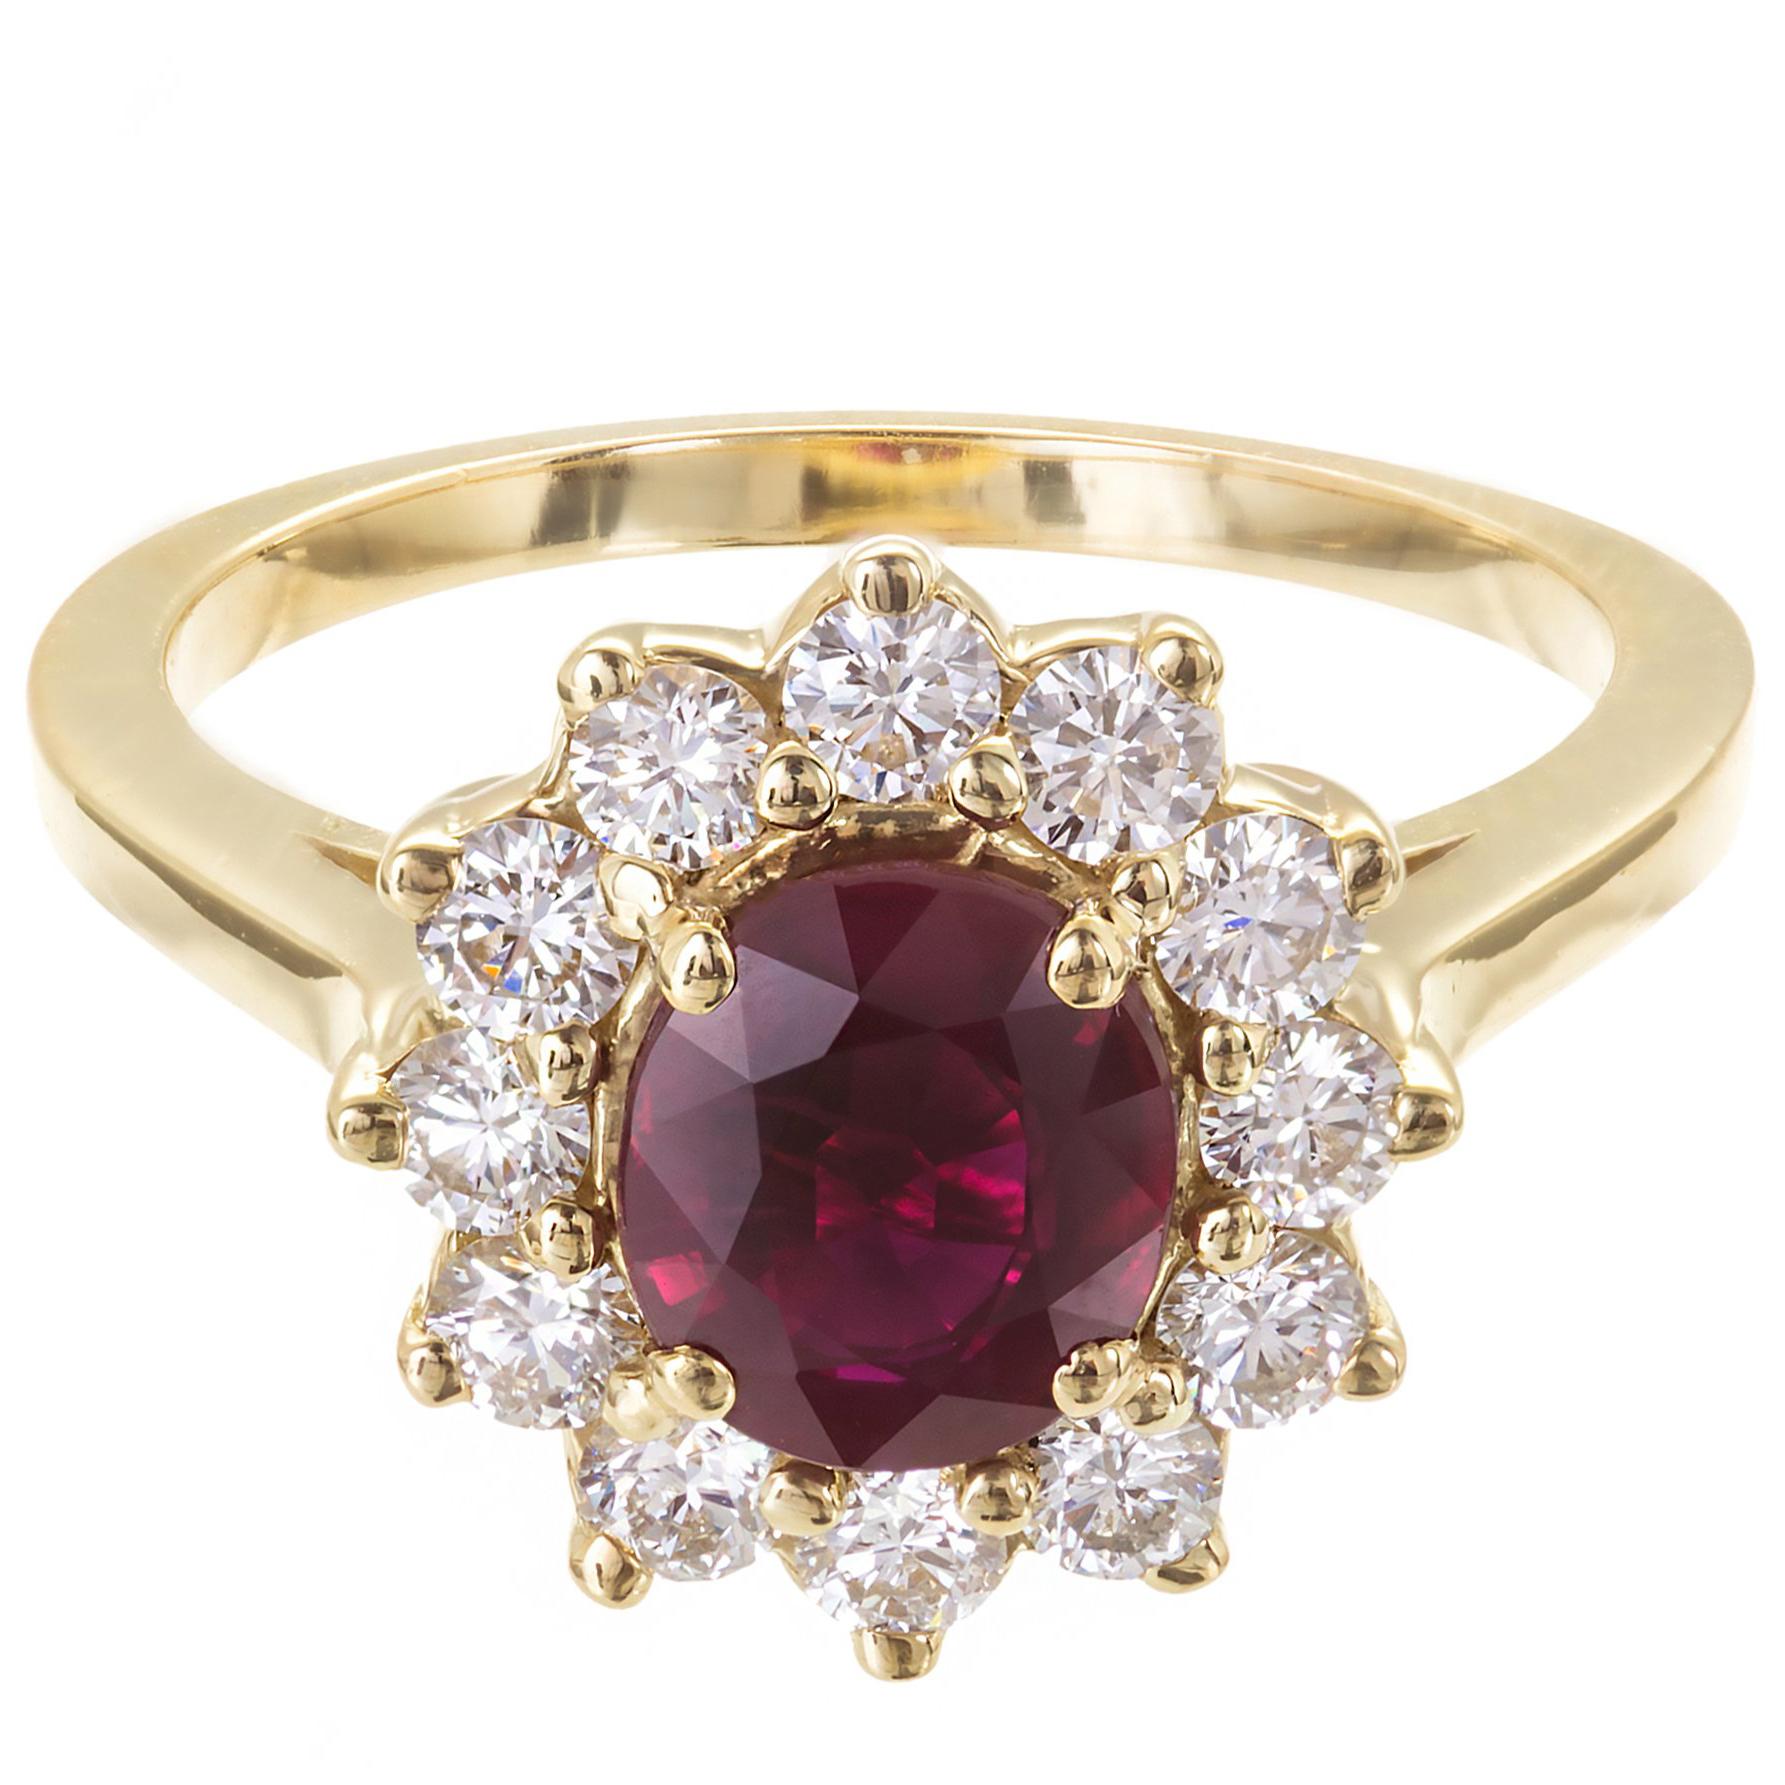 Ruby and diamond halo engagement ring. Excellent brightness and saturation. Heat with minor residue. Simple oval cluster with fine white sparkly diamonds in 18k yellow gold setting.

1 oval Red Ruby, approx. total weight 1.51cts, VS, 7.12 x 6.12 x